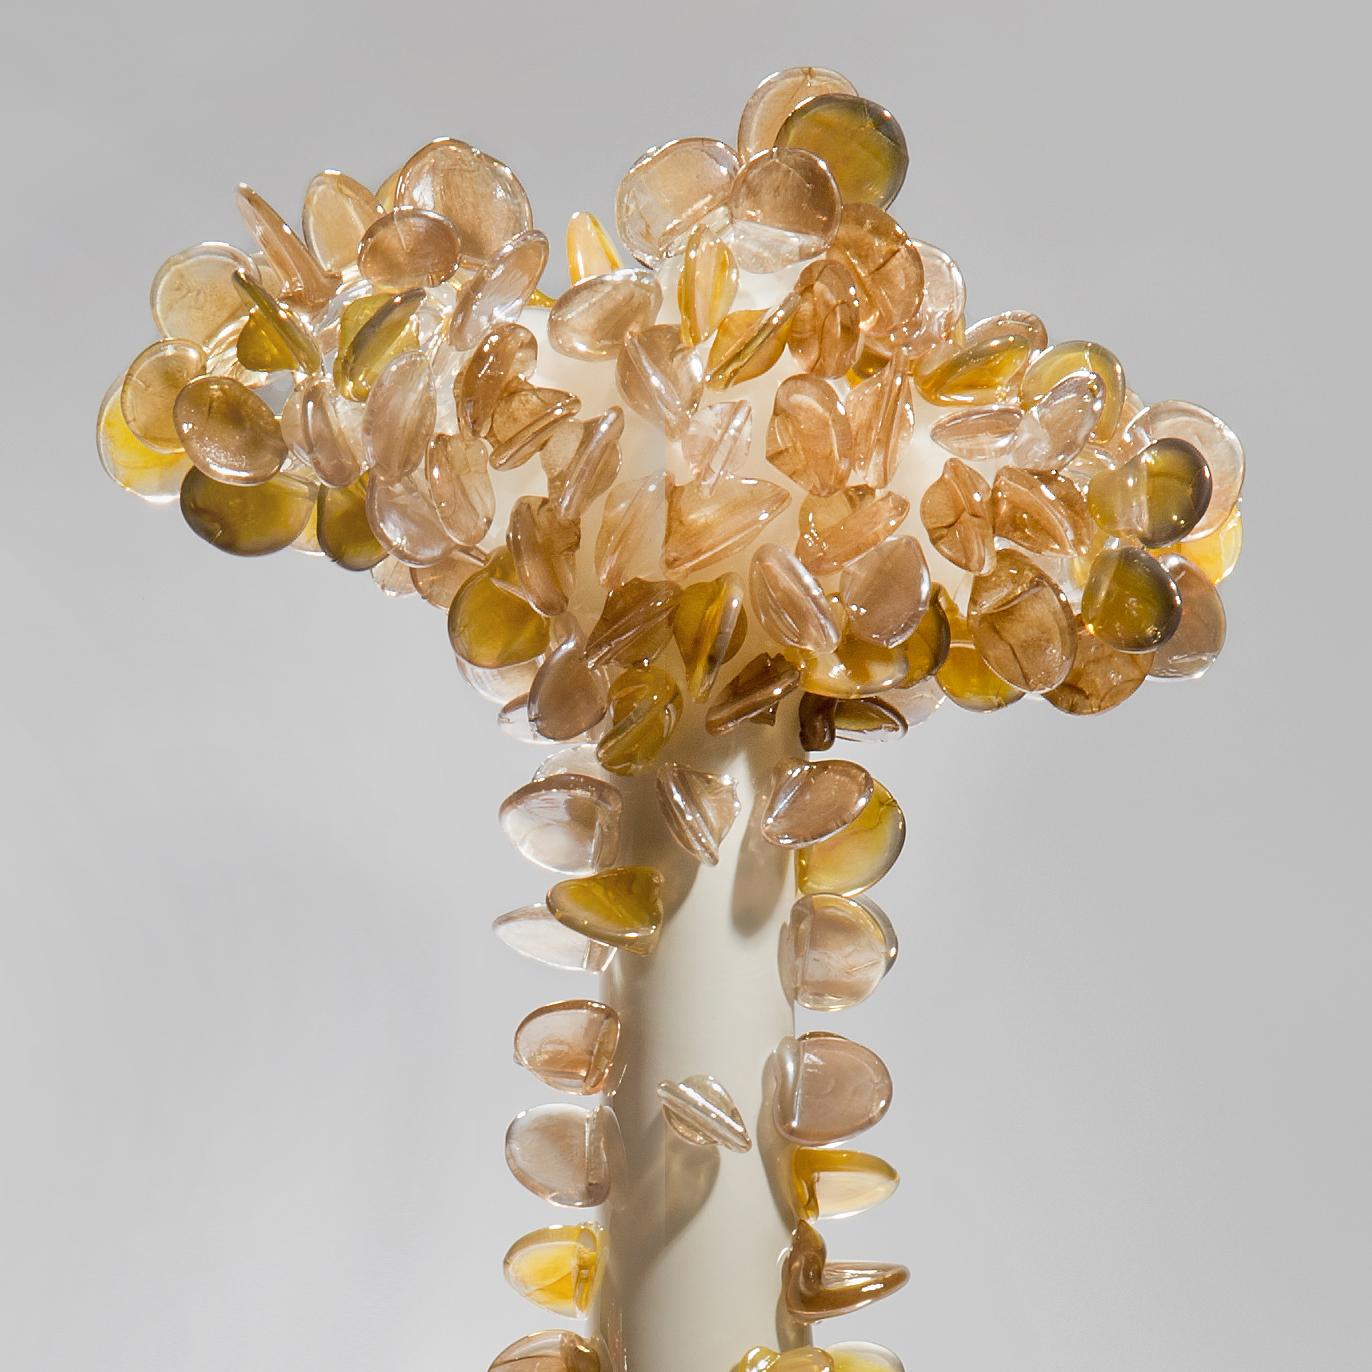 Organic Modern Enchanted Dusk in Bronze, a Unique Glass Tree Sculpture by Louis Thompson